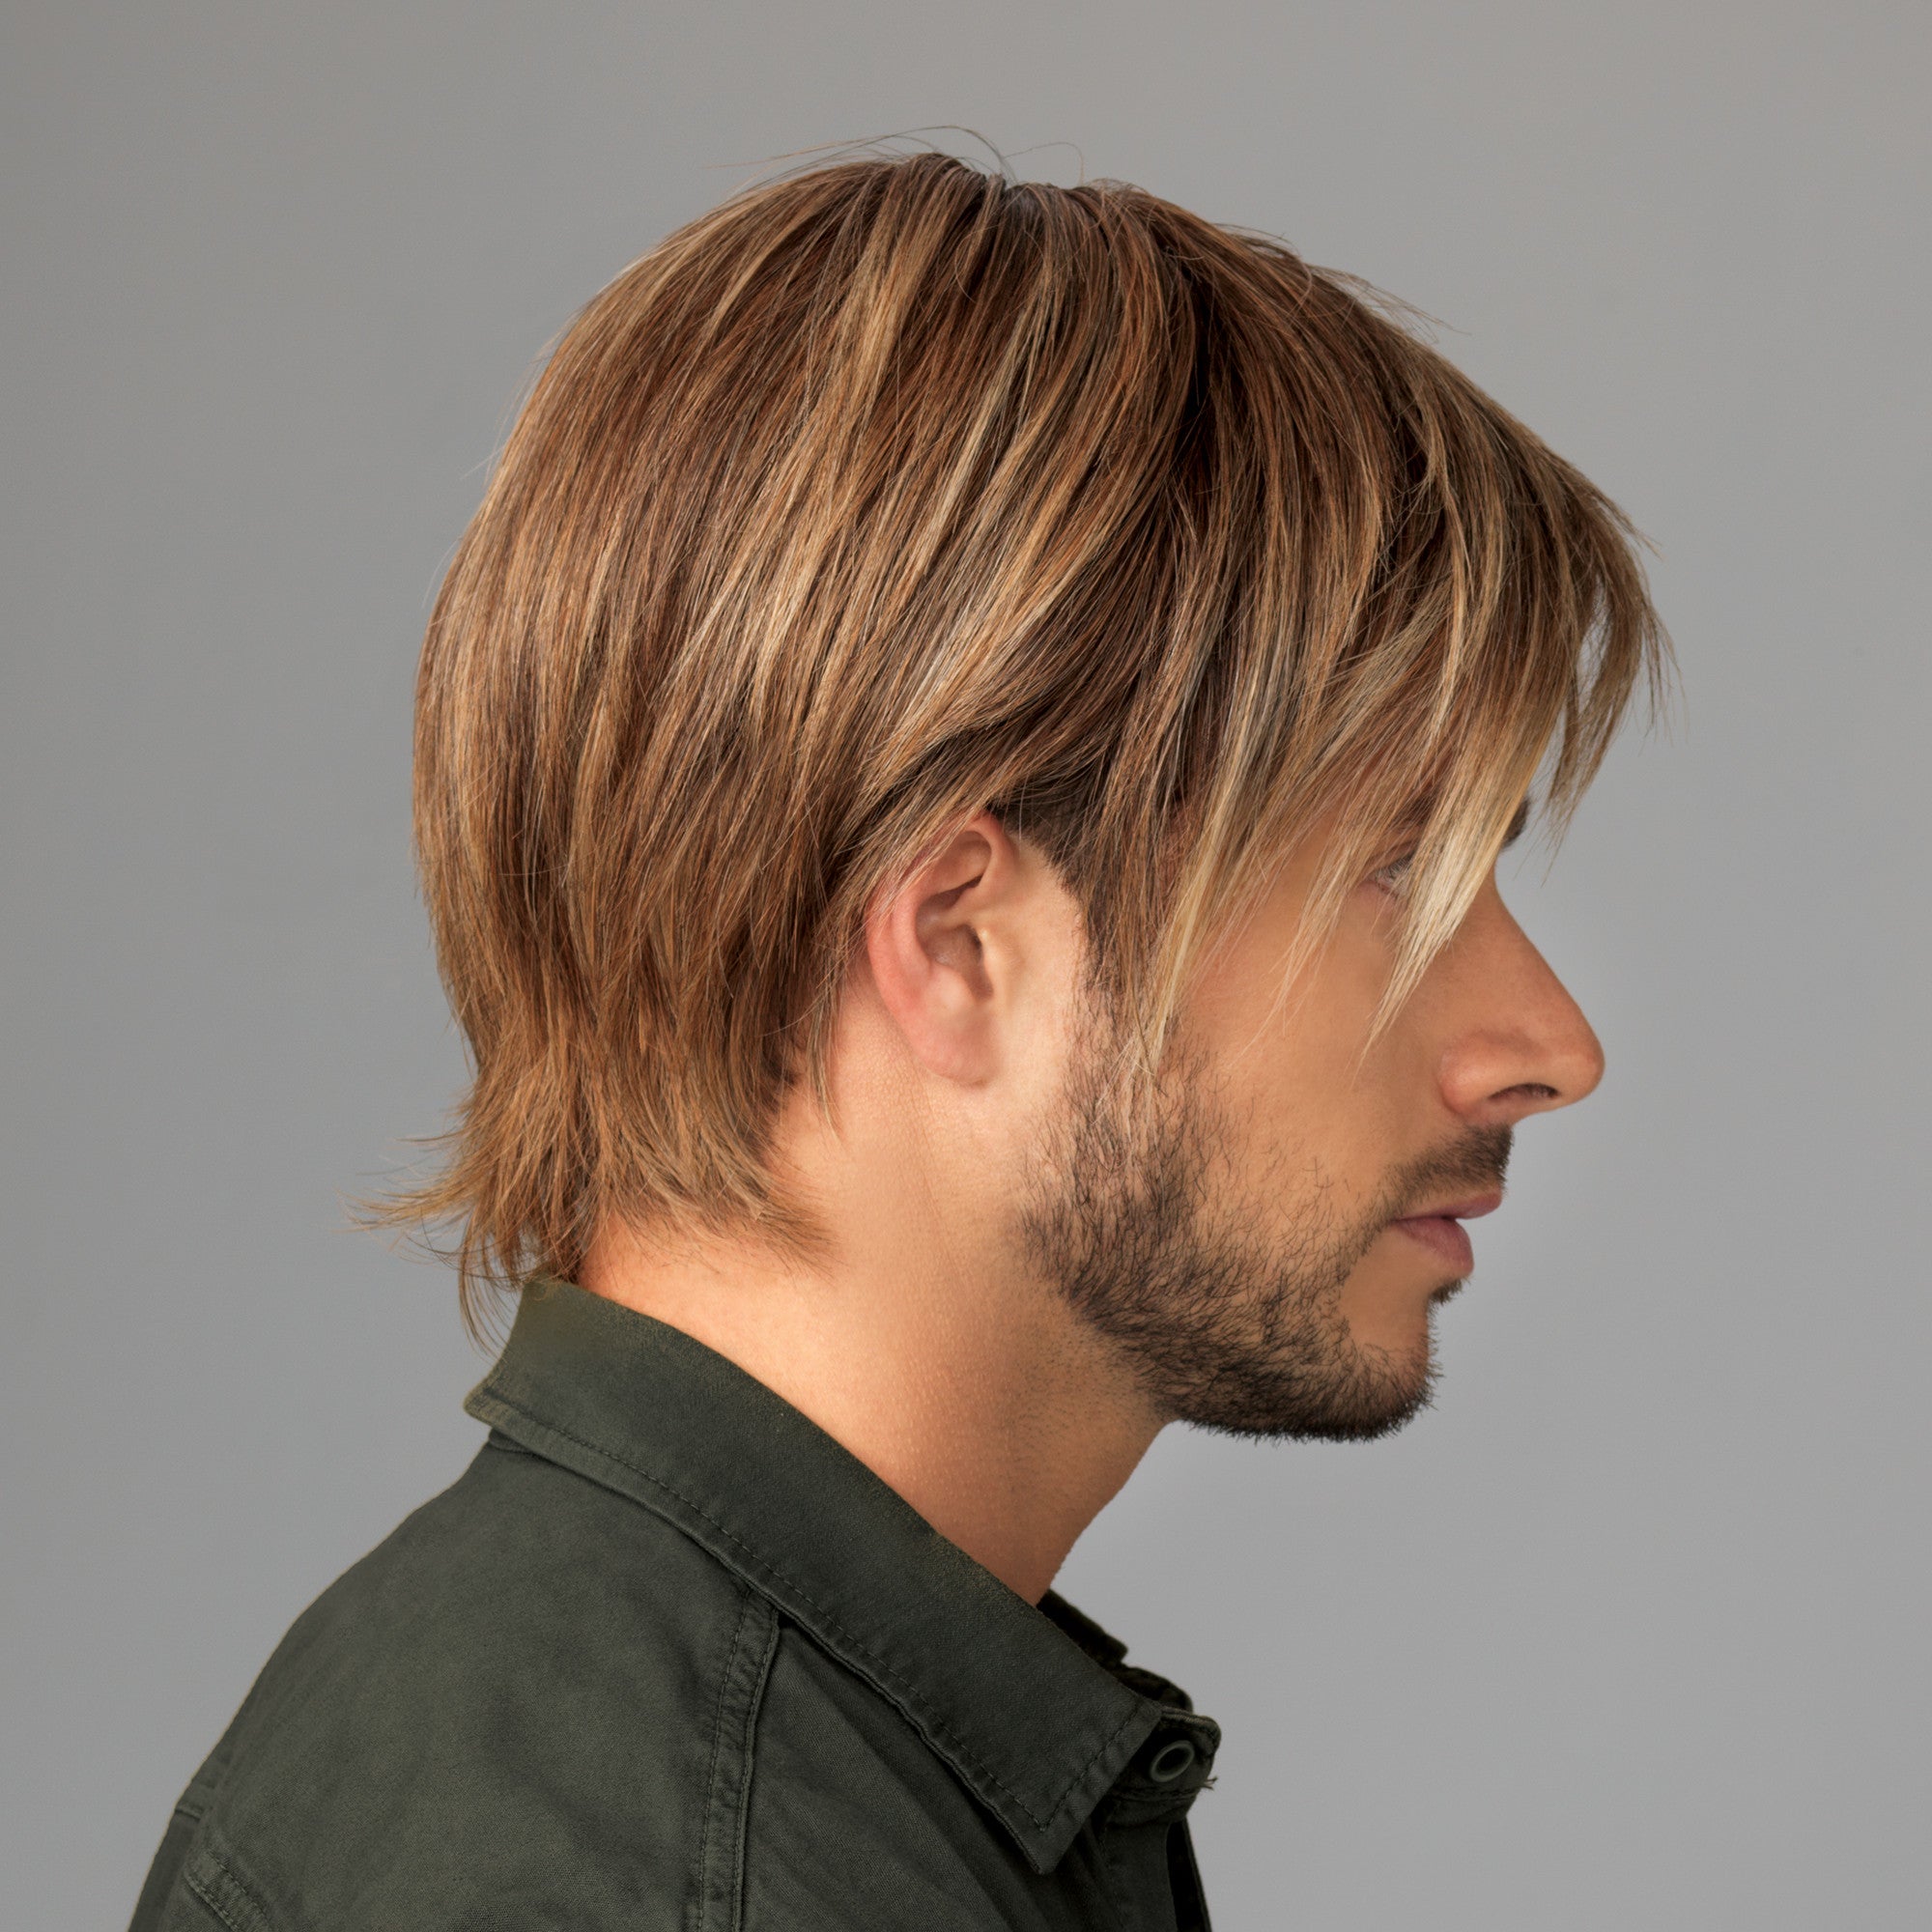 HIM Men's synthetic wig Chiseled